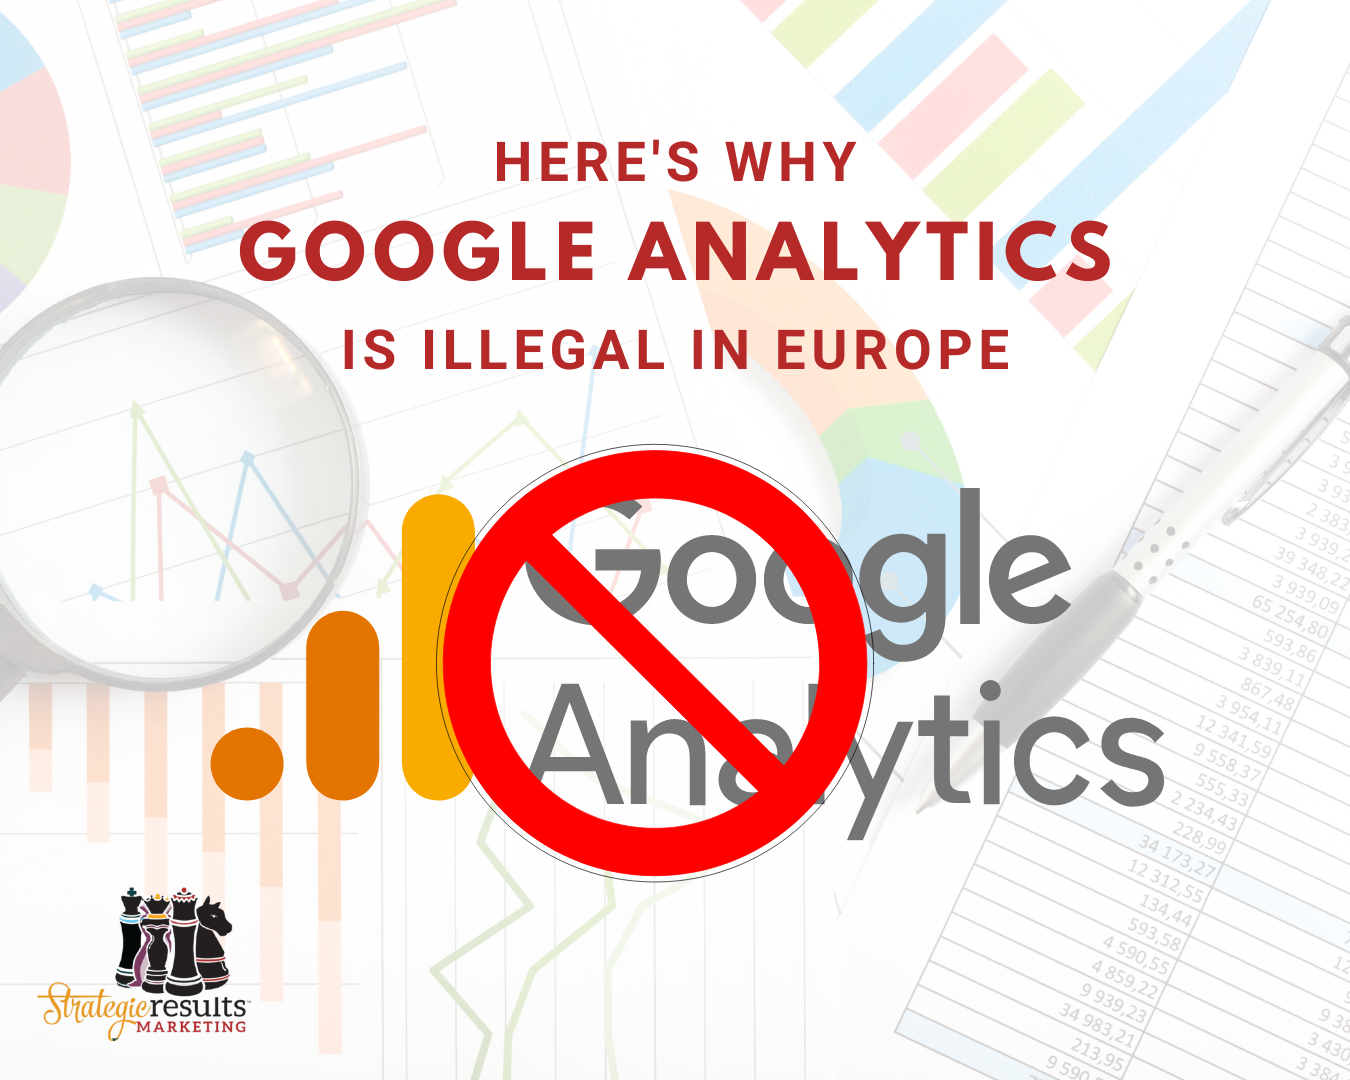 Here’s why Google Analytics is Illegal in Europe